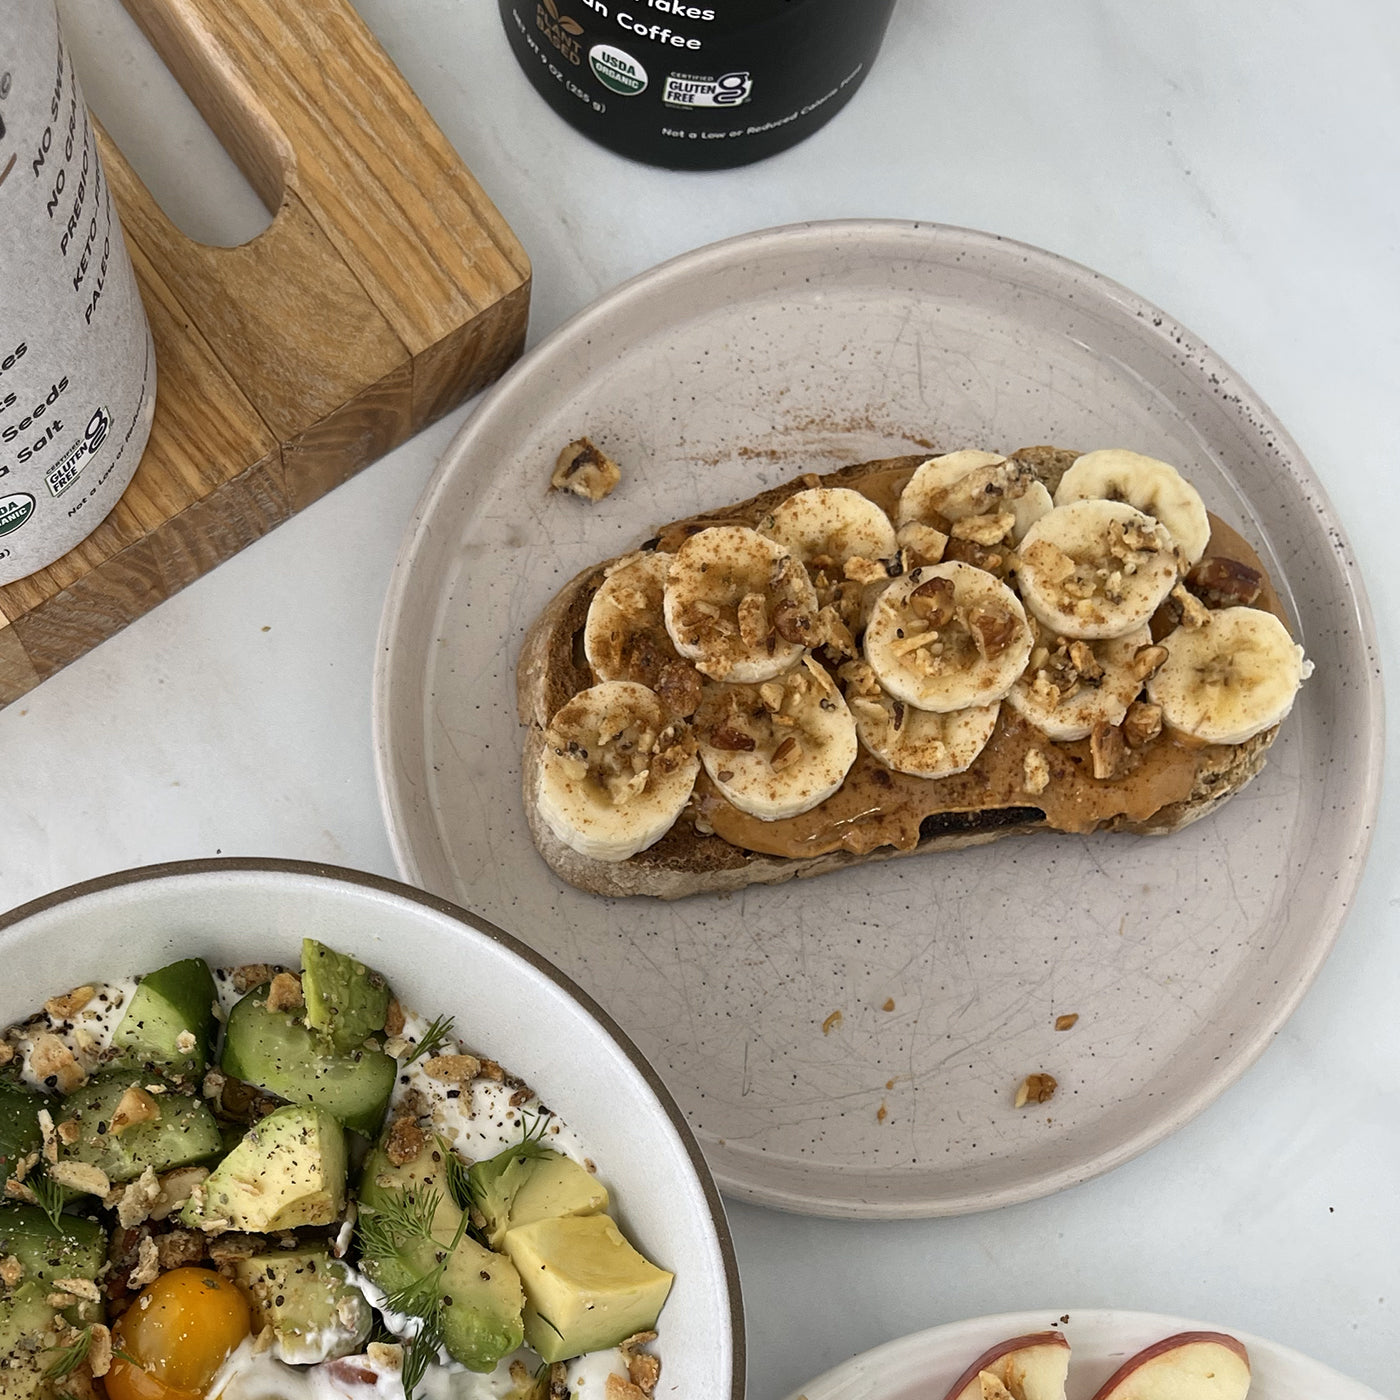 Peanut butter and banana toast topped with Struesli granola on a plate